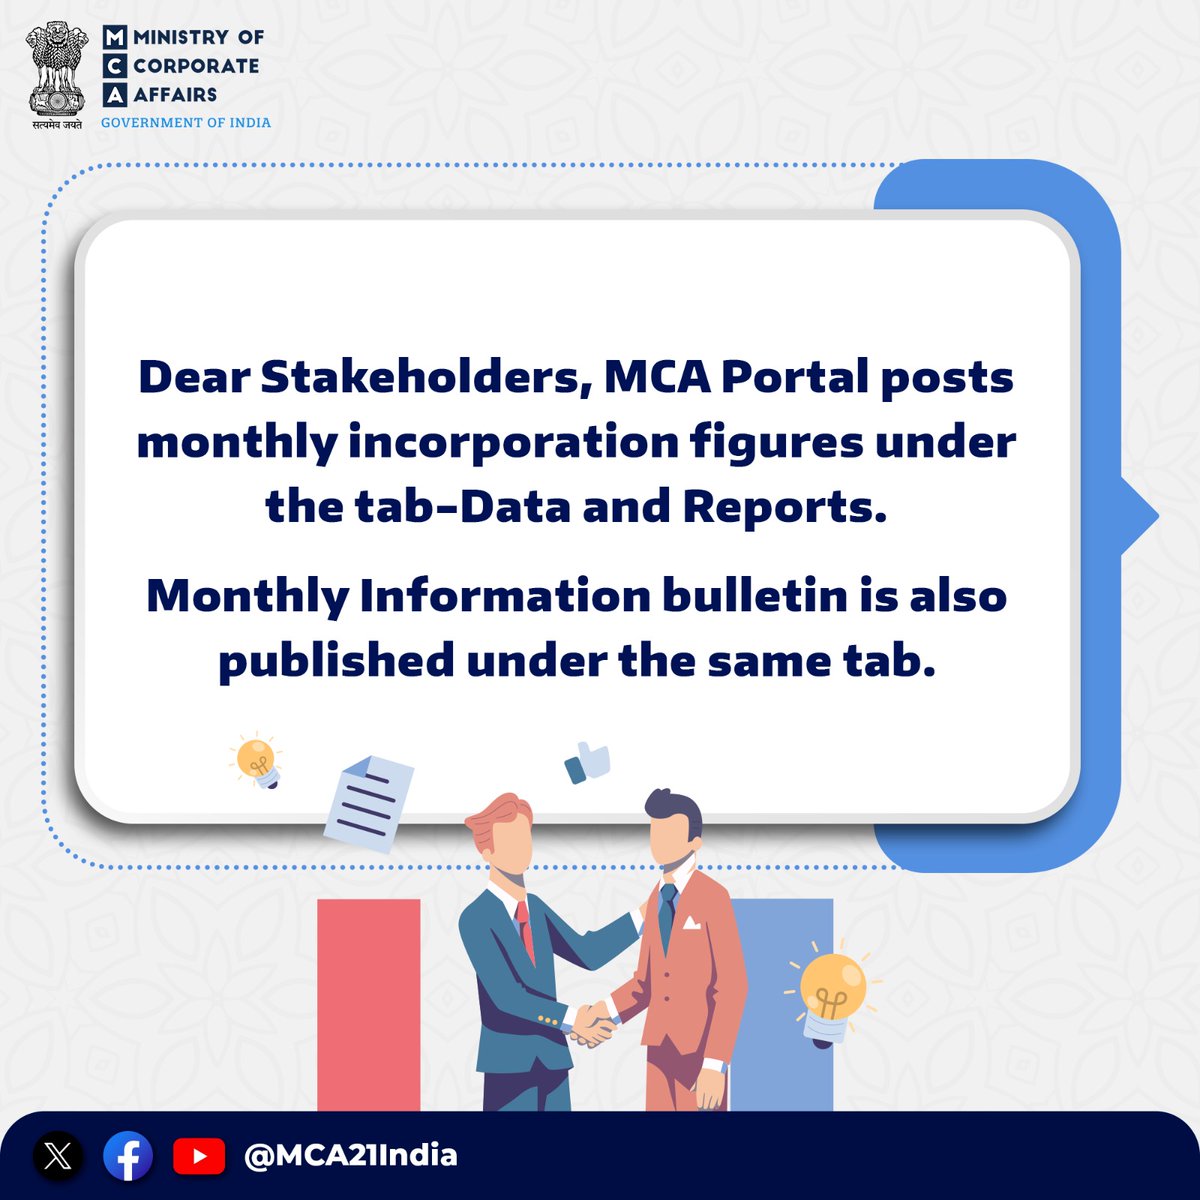 Dear Stakeholders, MCA Portal posts monthly incorporation figures under the tab-Data and Reports. Monthly Information Bulletin is also available under the same tab. #MCA #MCAPortal #MonthlyIncorporationFigures #Bulletin